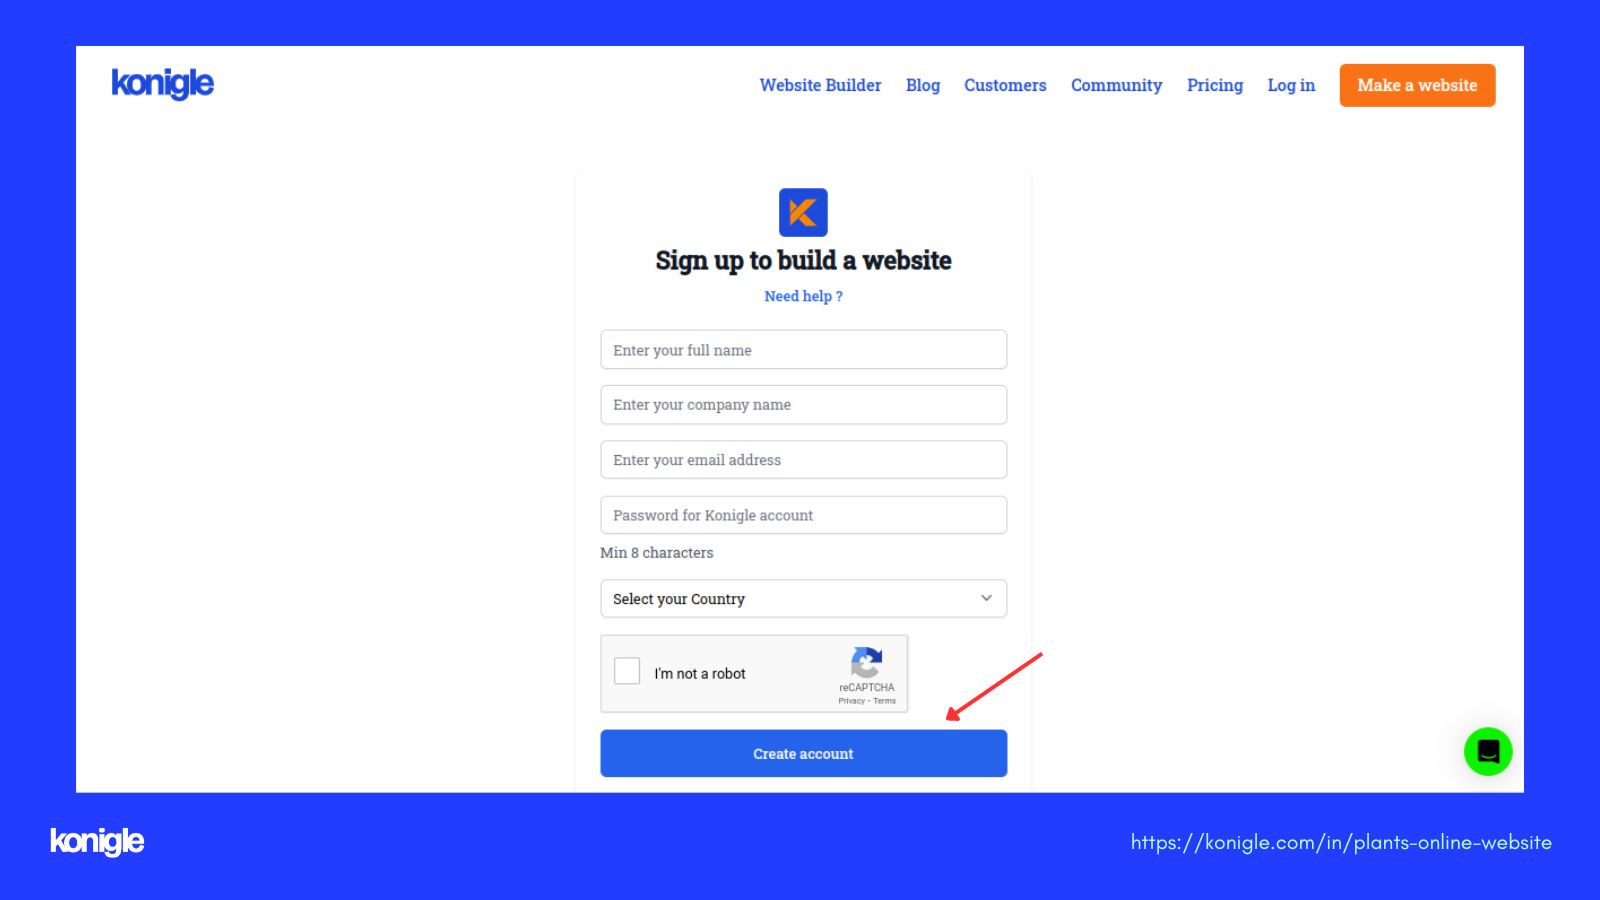 Create an account button for signing up to build a website